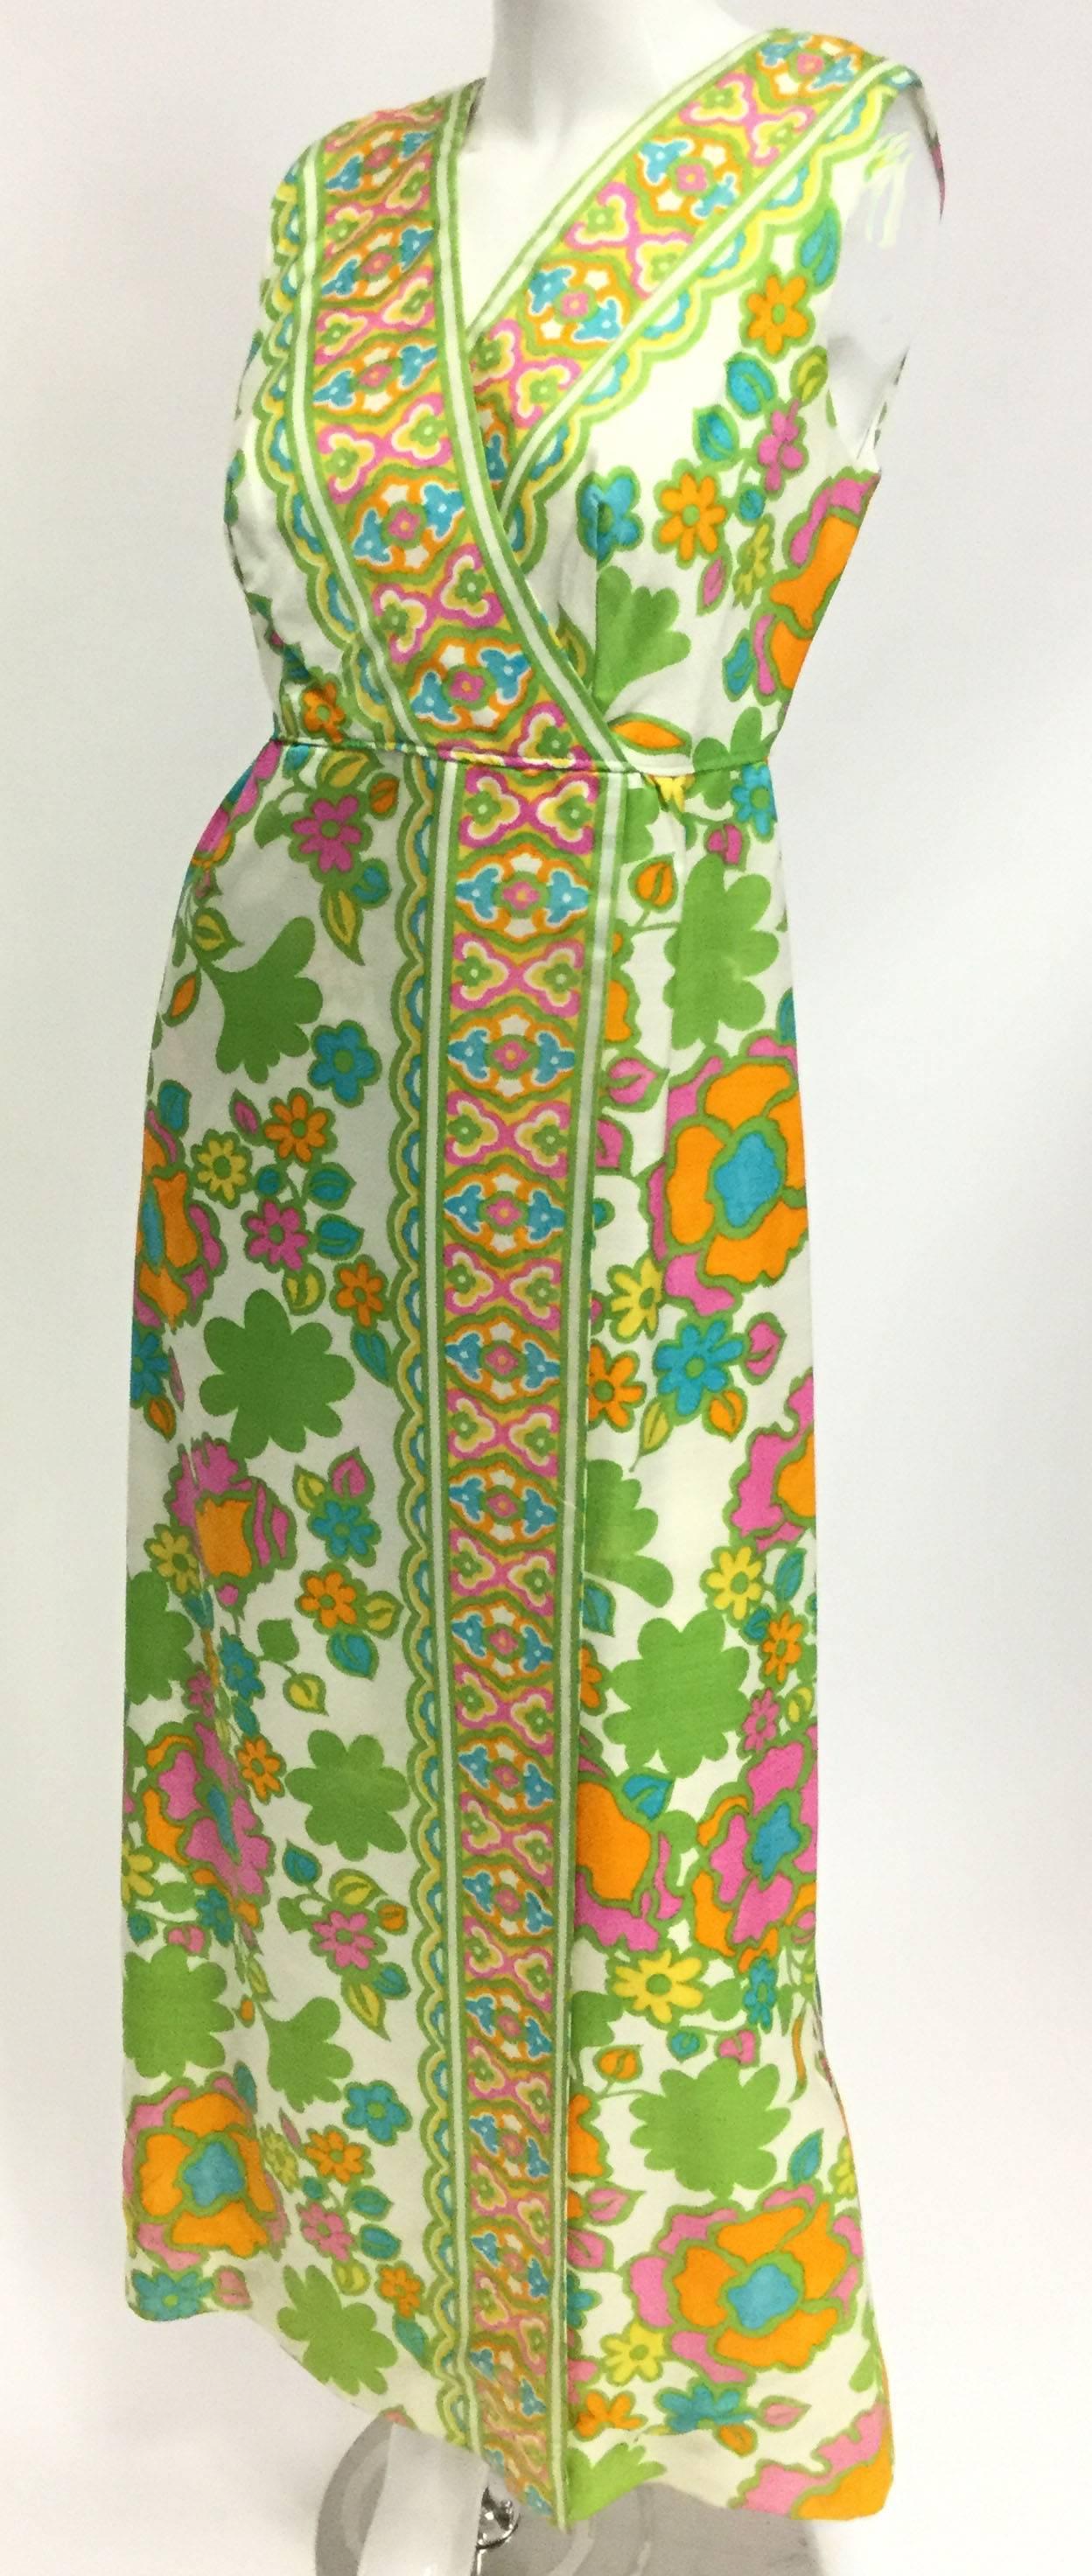 This sleeveless, ankle length dress features a V-neck front collar as well as V-neck back scoop, and a long open sheath skirt. The print features a whimsical flower print and playful geometric hem borders in a fresh combination of colors including